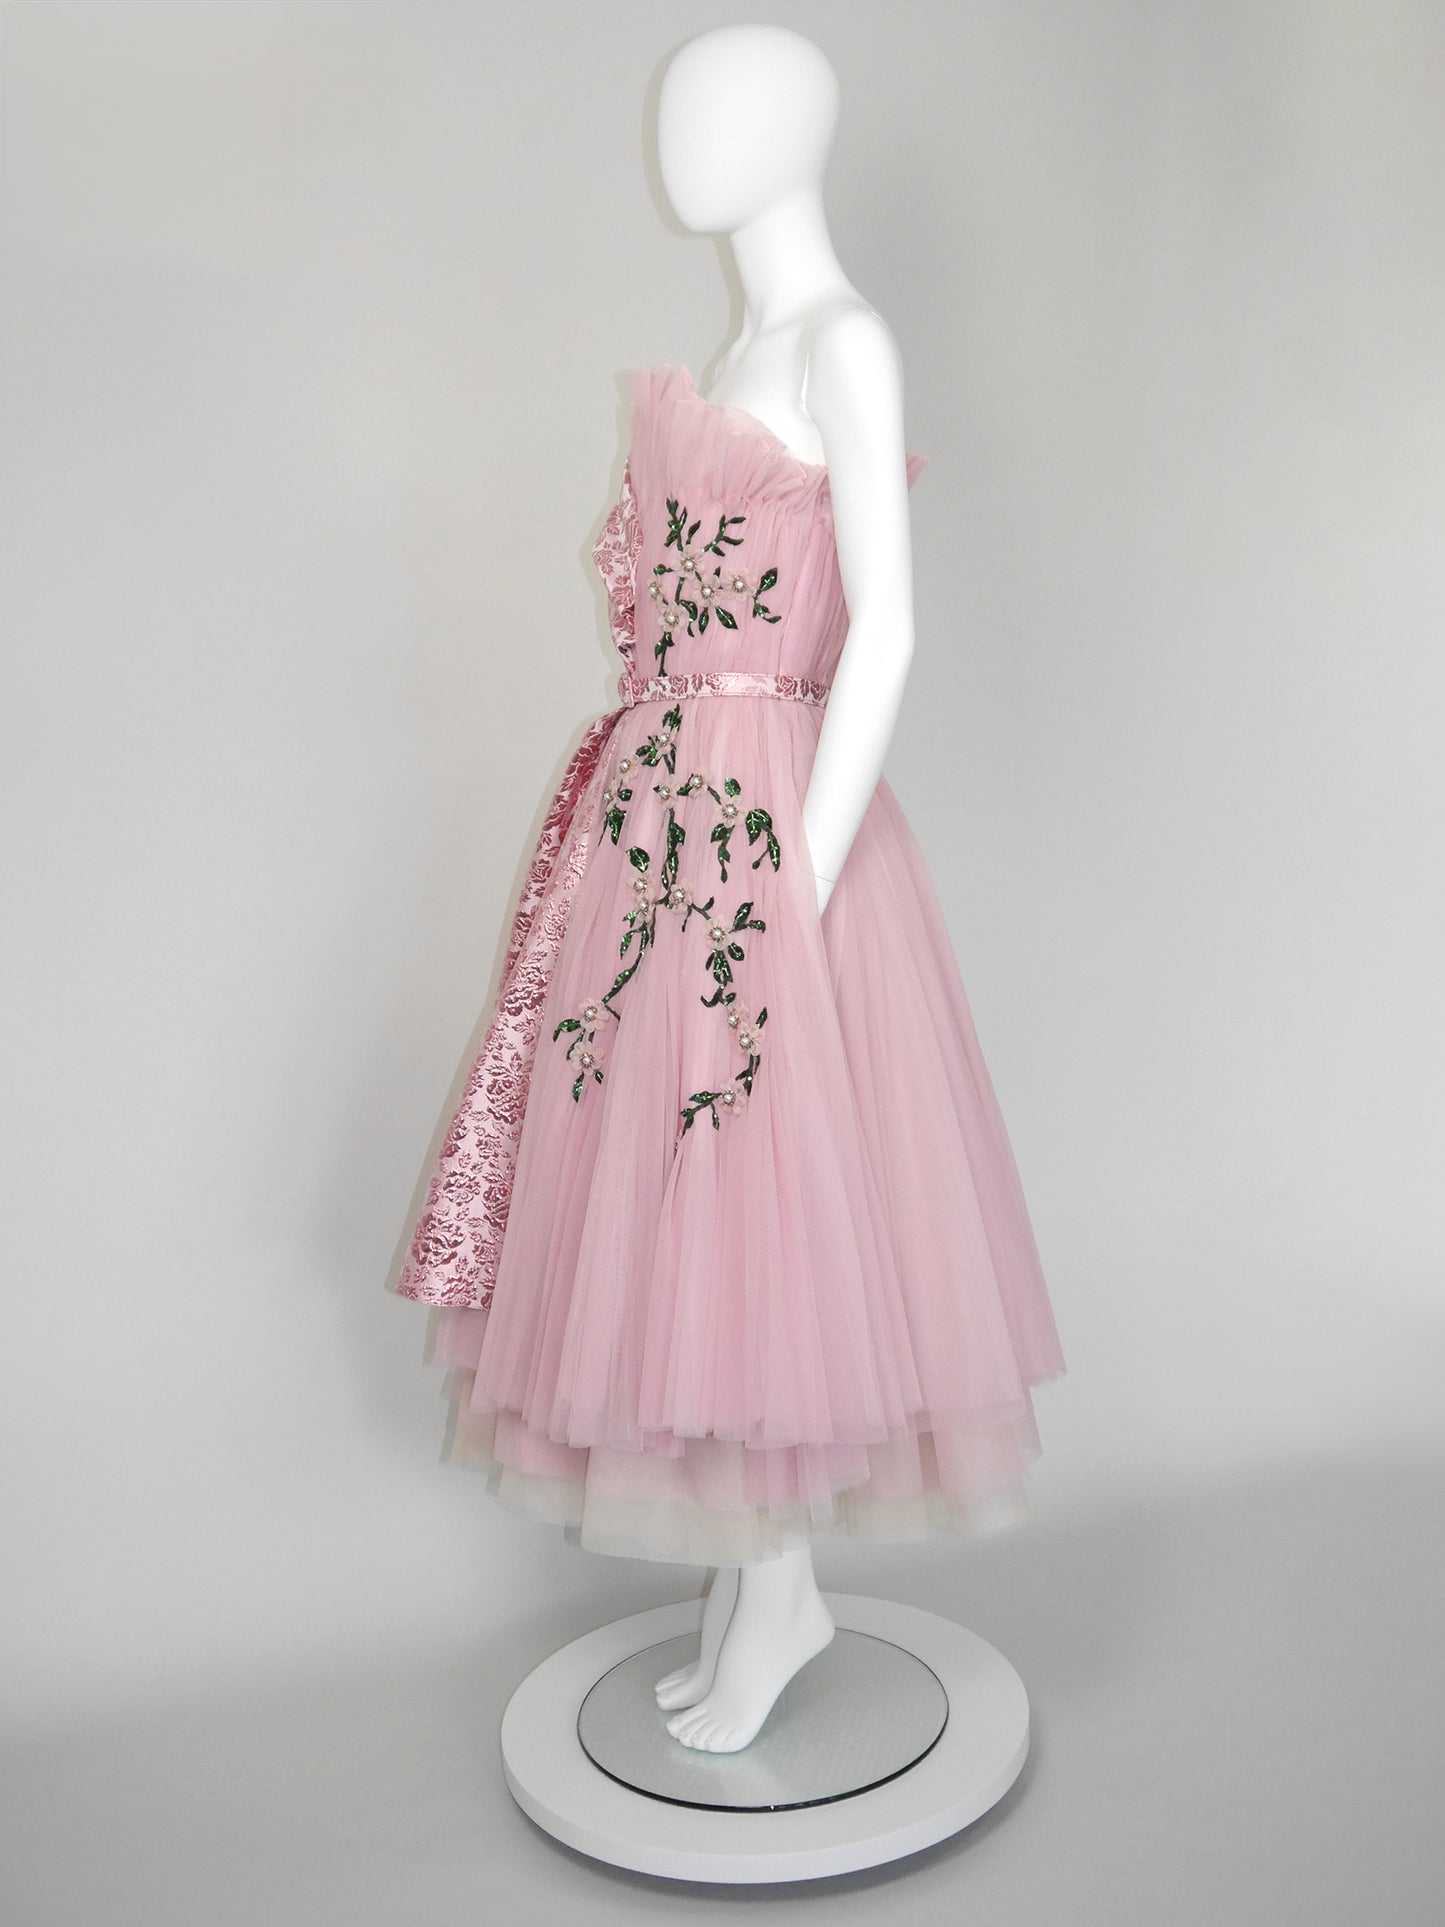 MOSCHINO Couture! by Jeremy Scott Spring 2021 Tulle Brocade Ball Gown Evening Dress Size XS NWT